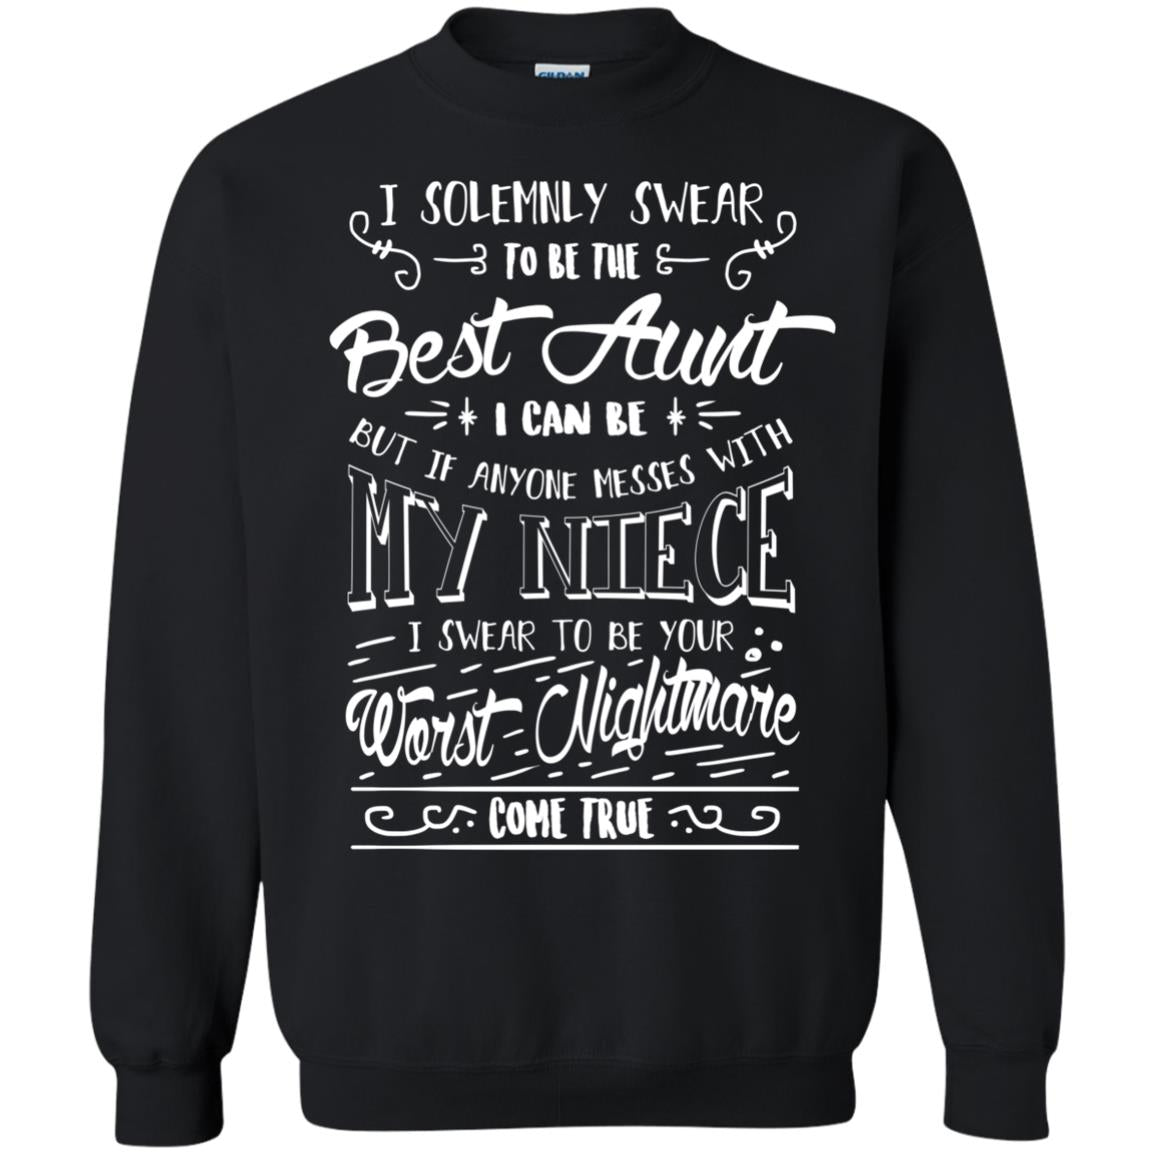 I Solemnly Swear To Be The Best Aunt I Can Be But If Anyone Messes With My Niece I Swear To Be Your Worst Nightmare Come TrueG180 Gildan Crewneck Pullover Sweatshirt 8 oz.